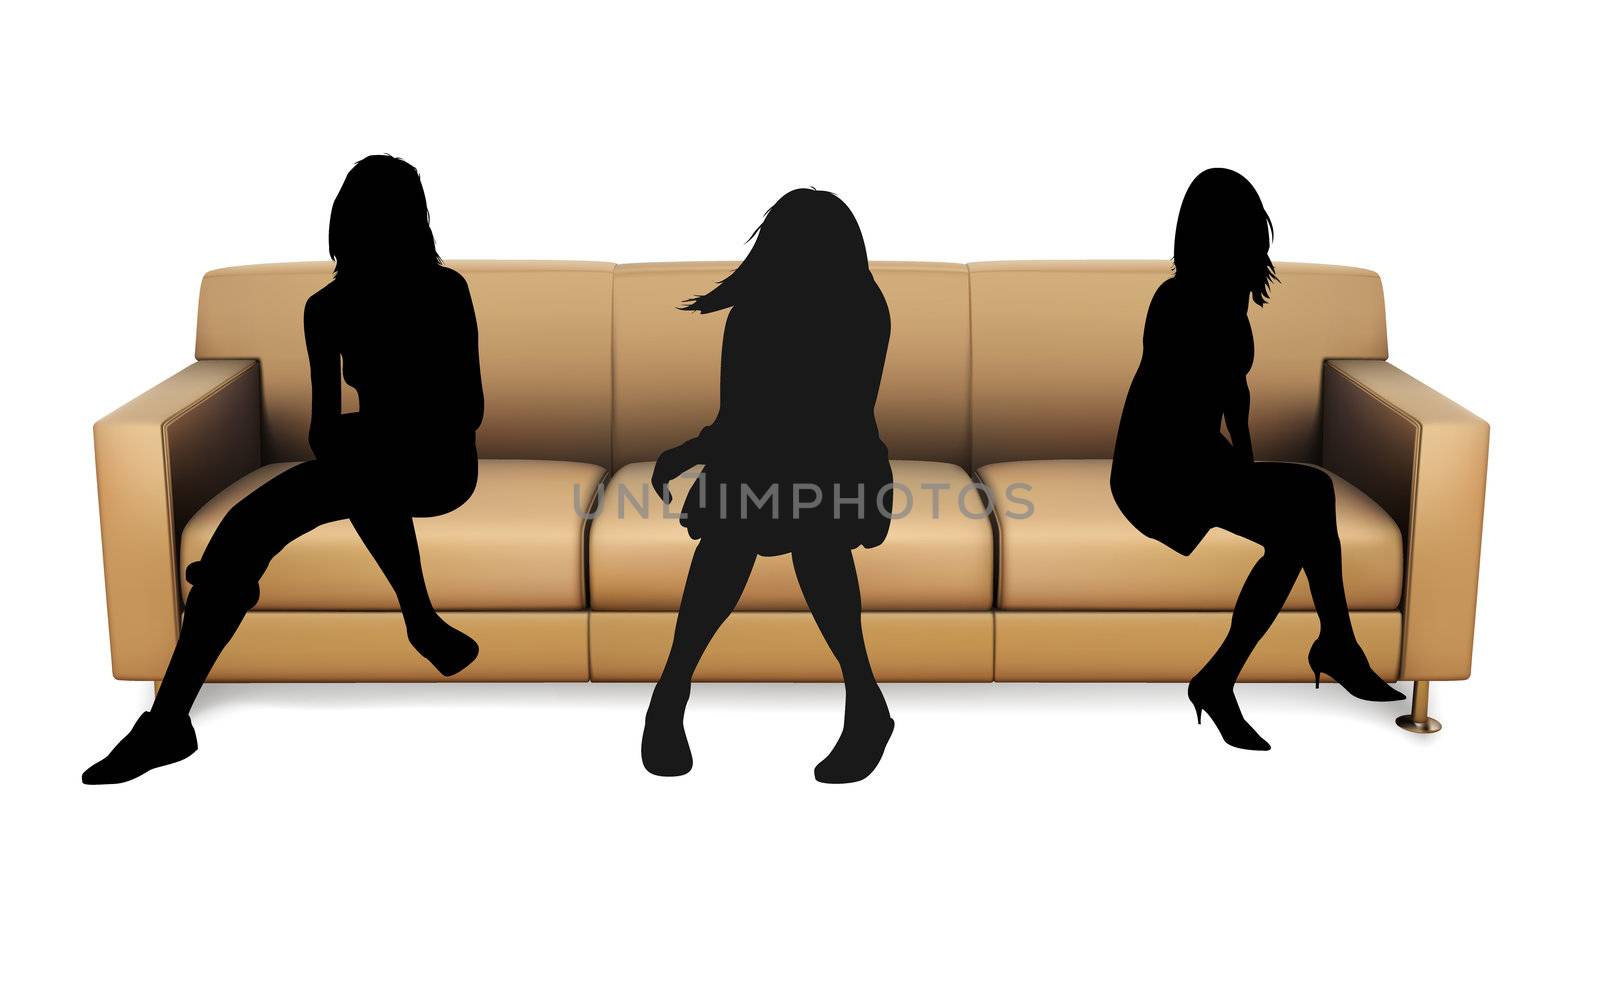 Here you can see three girls sitting on the sofa